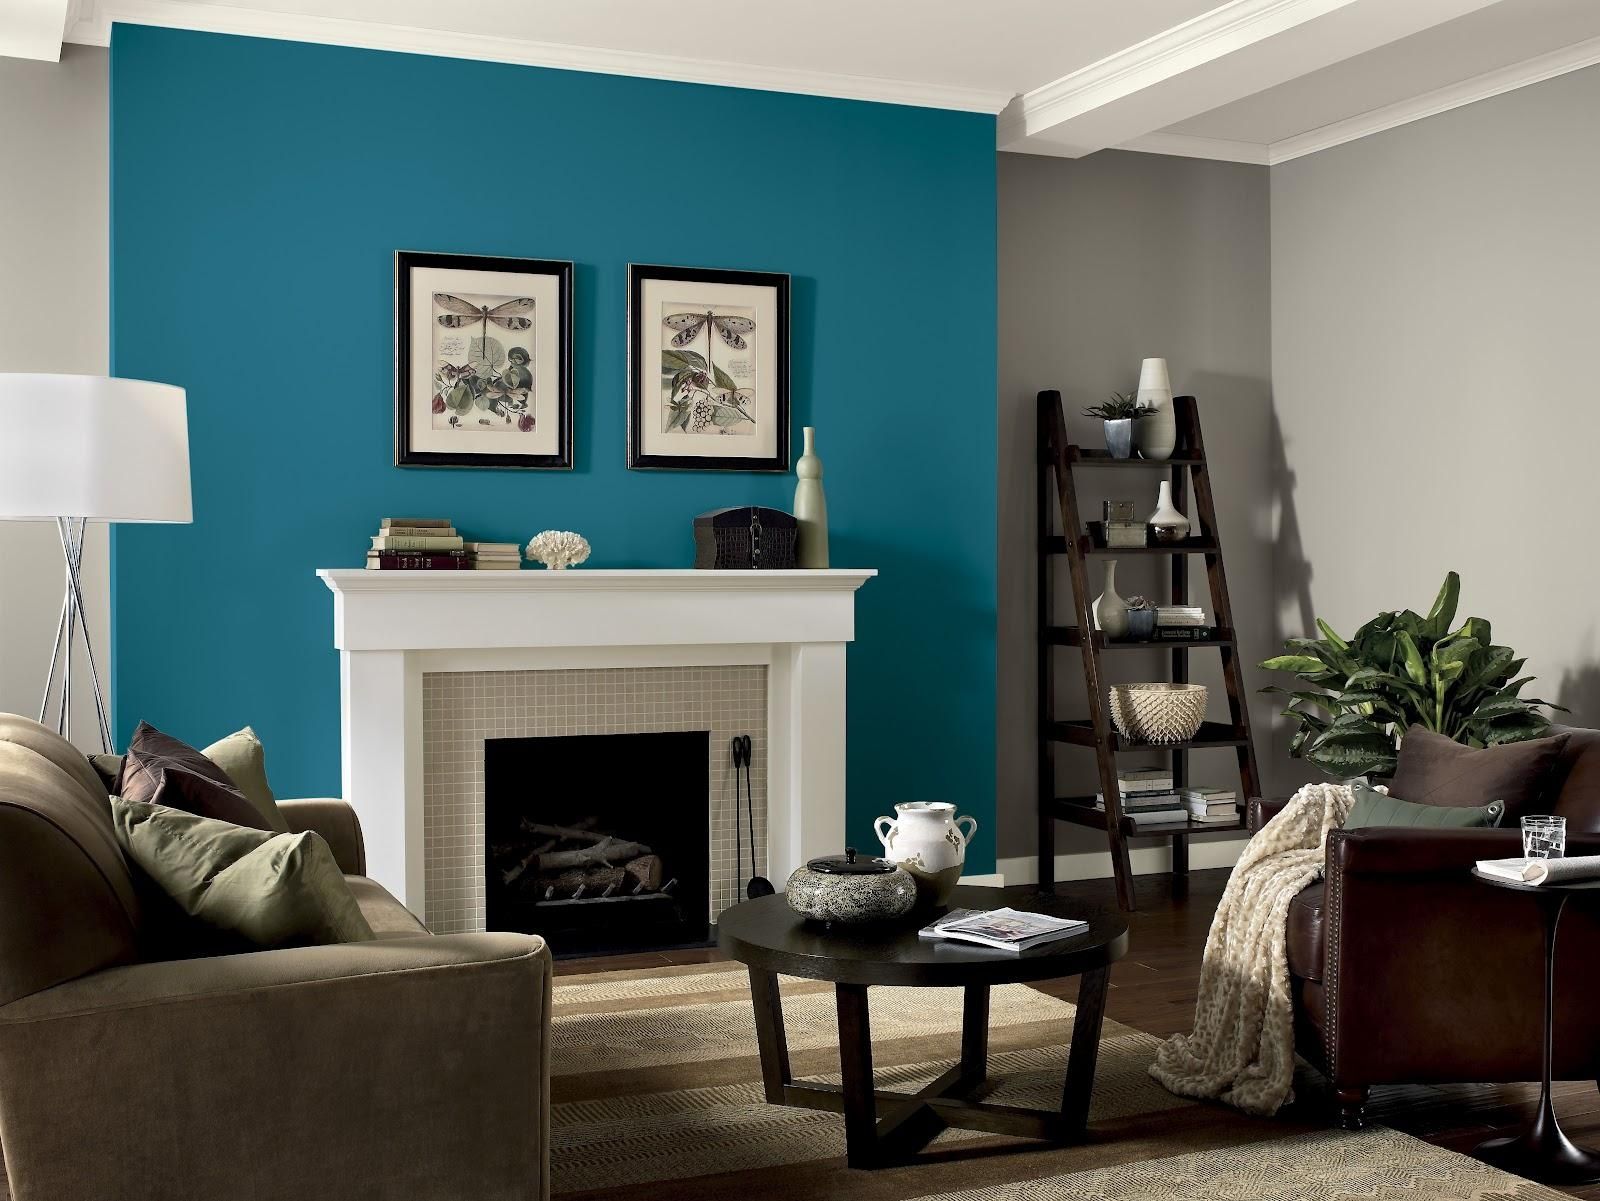 Marvellous Of Best Interior Paint Colors With Cool Wall Art On Within Fireplace Wall Art (View 4 of 20)